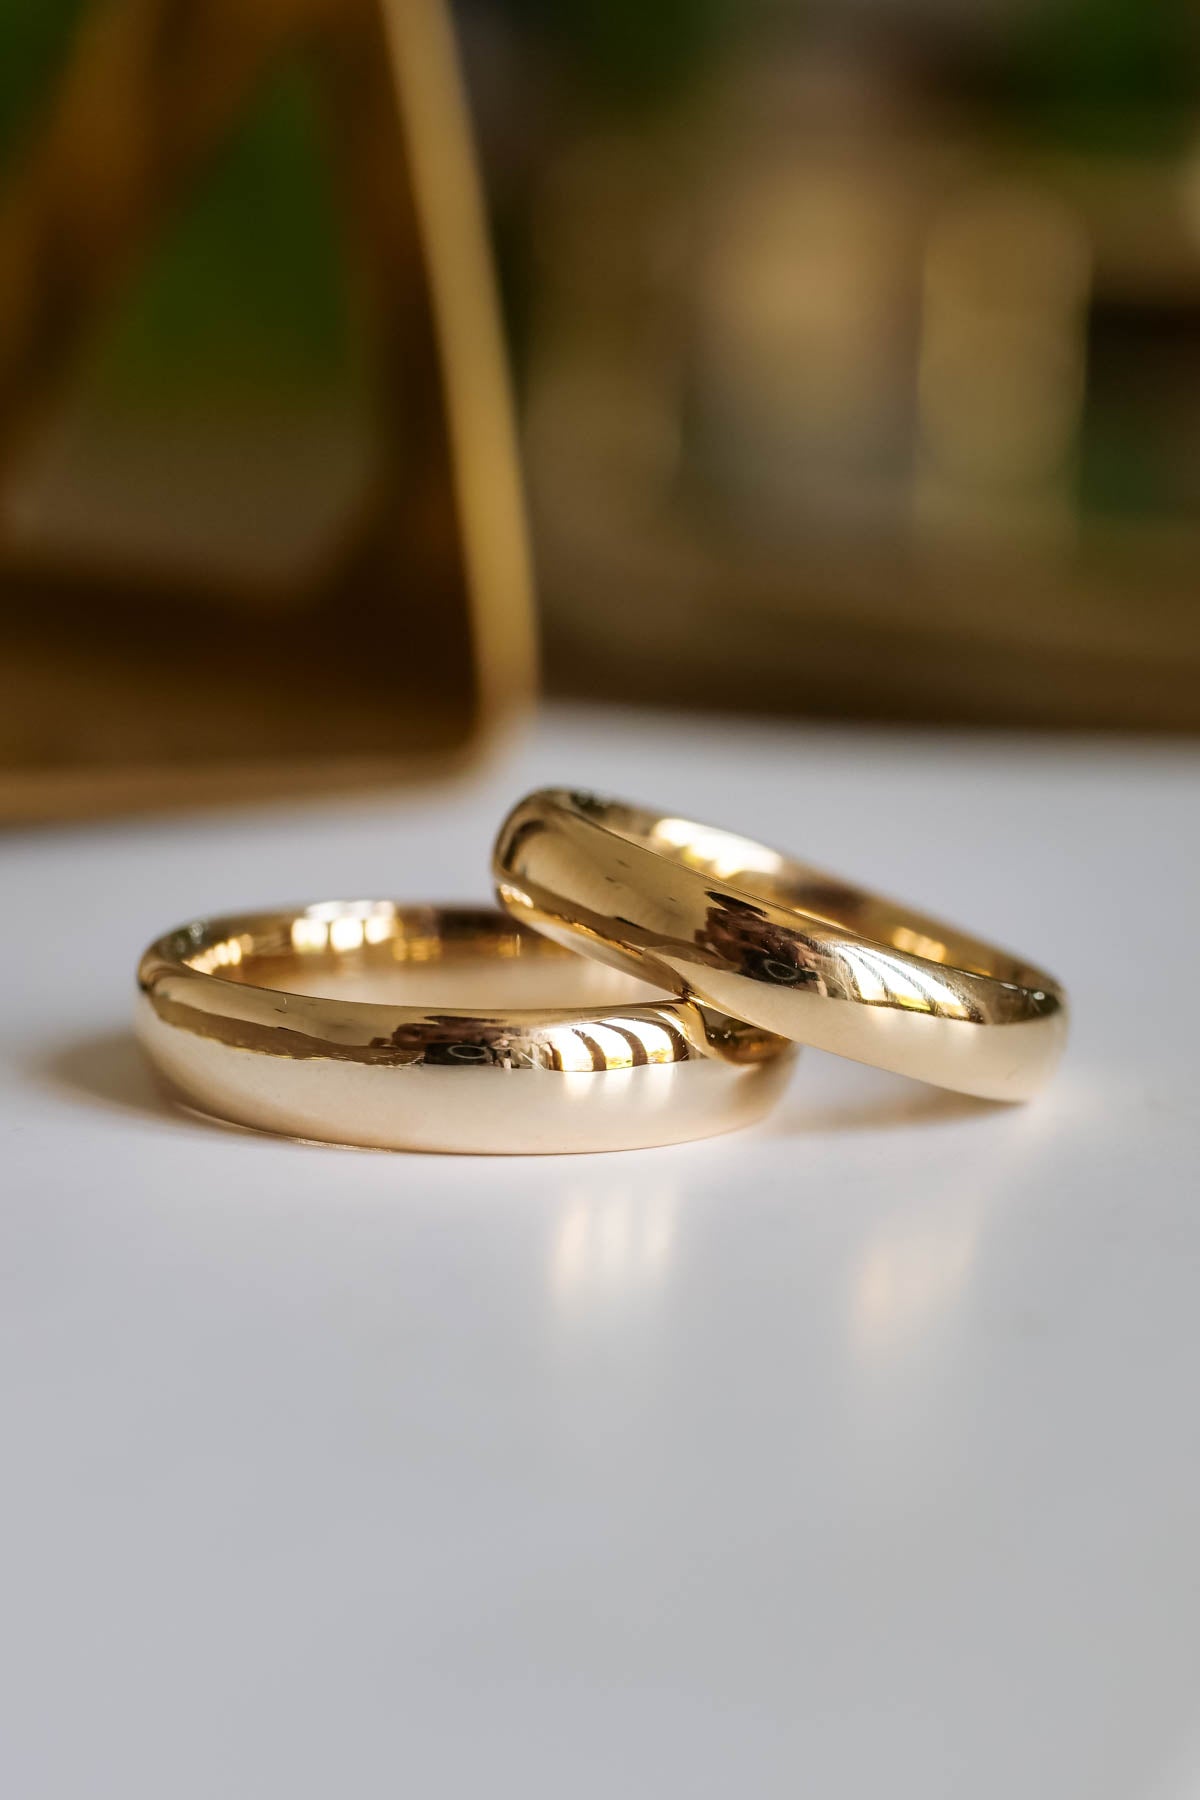 Pin on engagement rings for Couples | www.menjewell.com